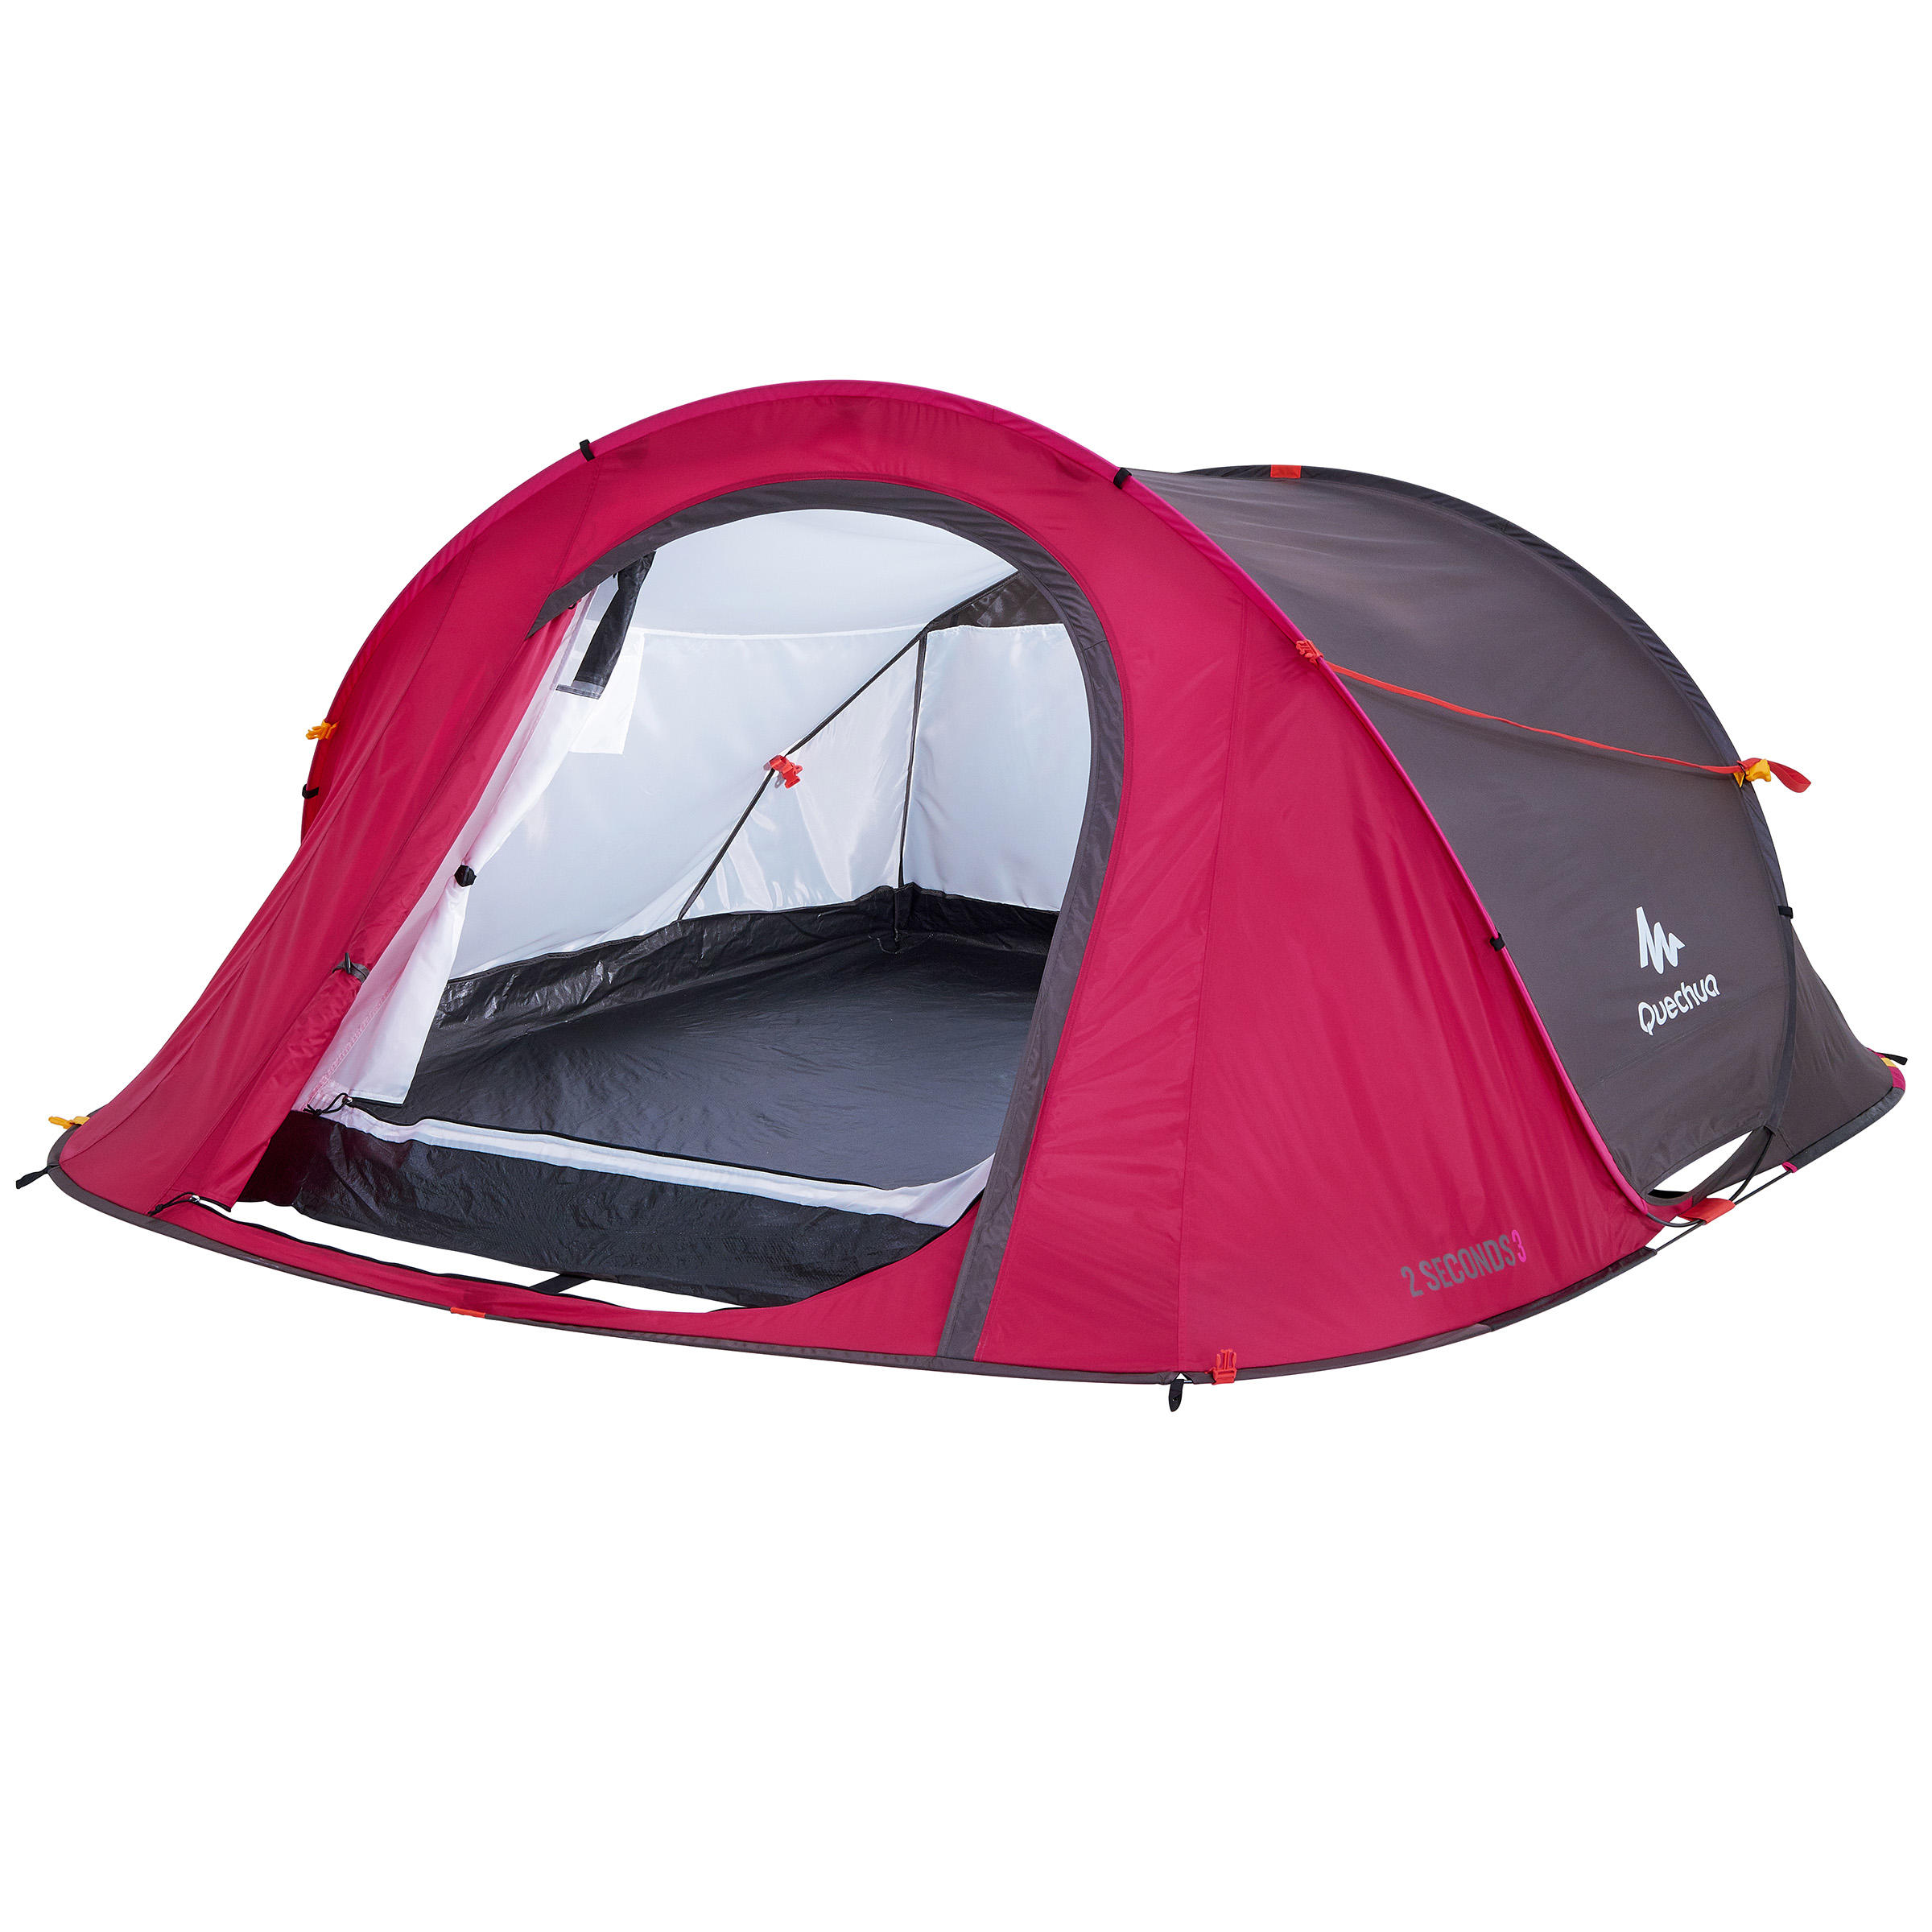 QUECHUA 2 SECONDS Camping Tent | 3 People - Pink